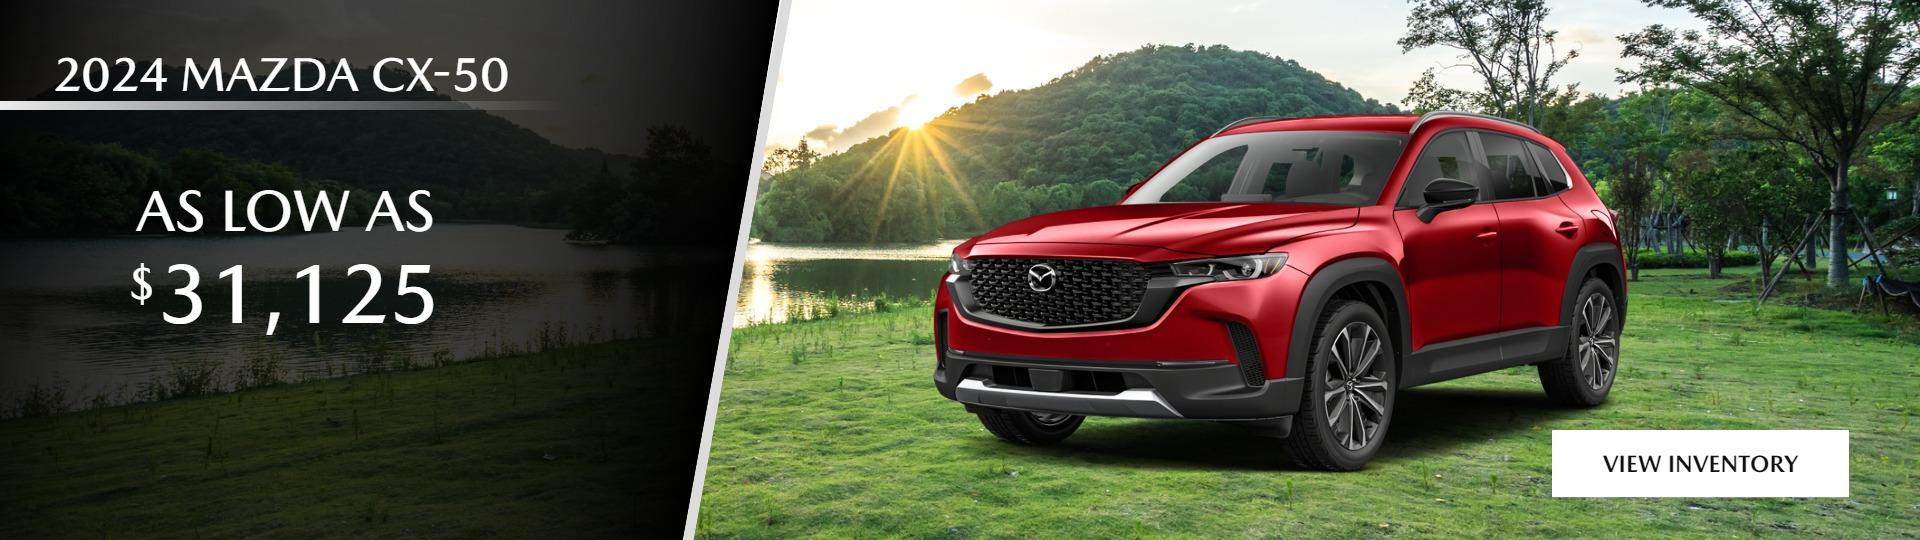 2024 CX-50 
For as low as $31,125